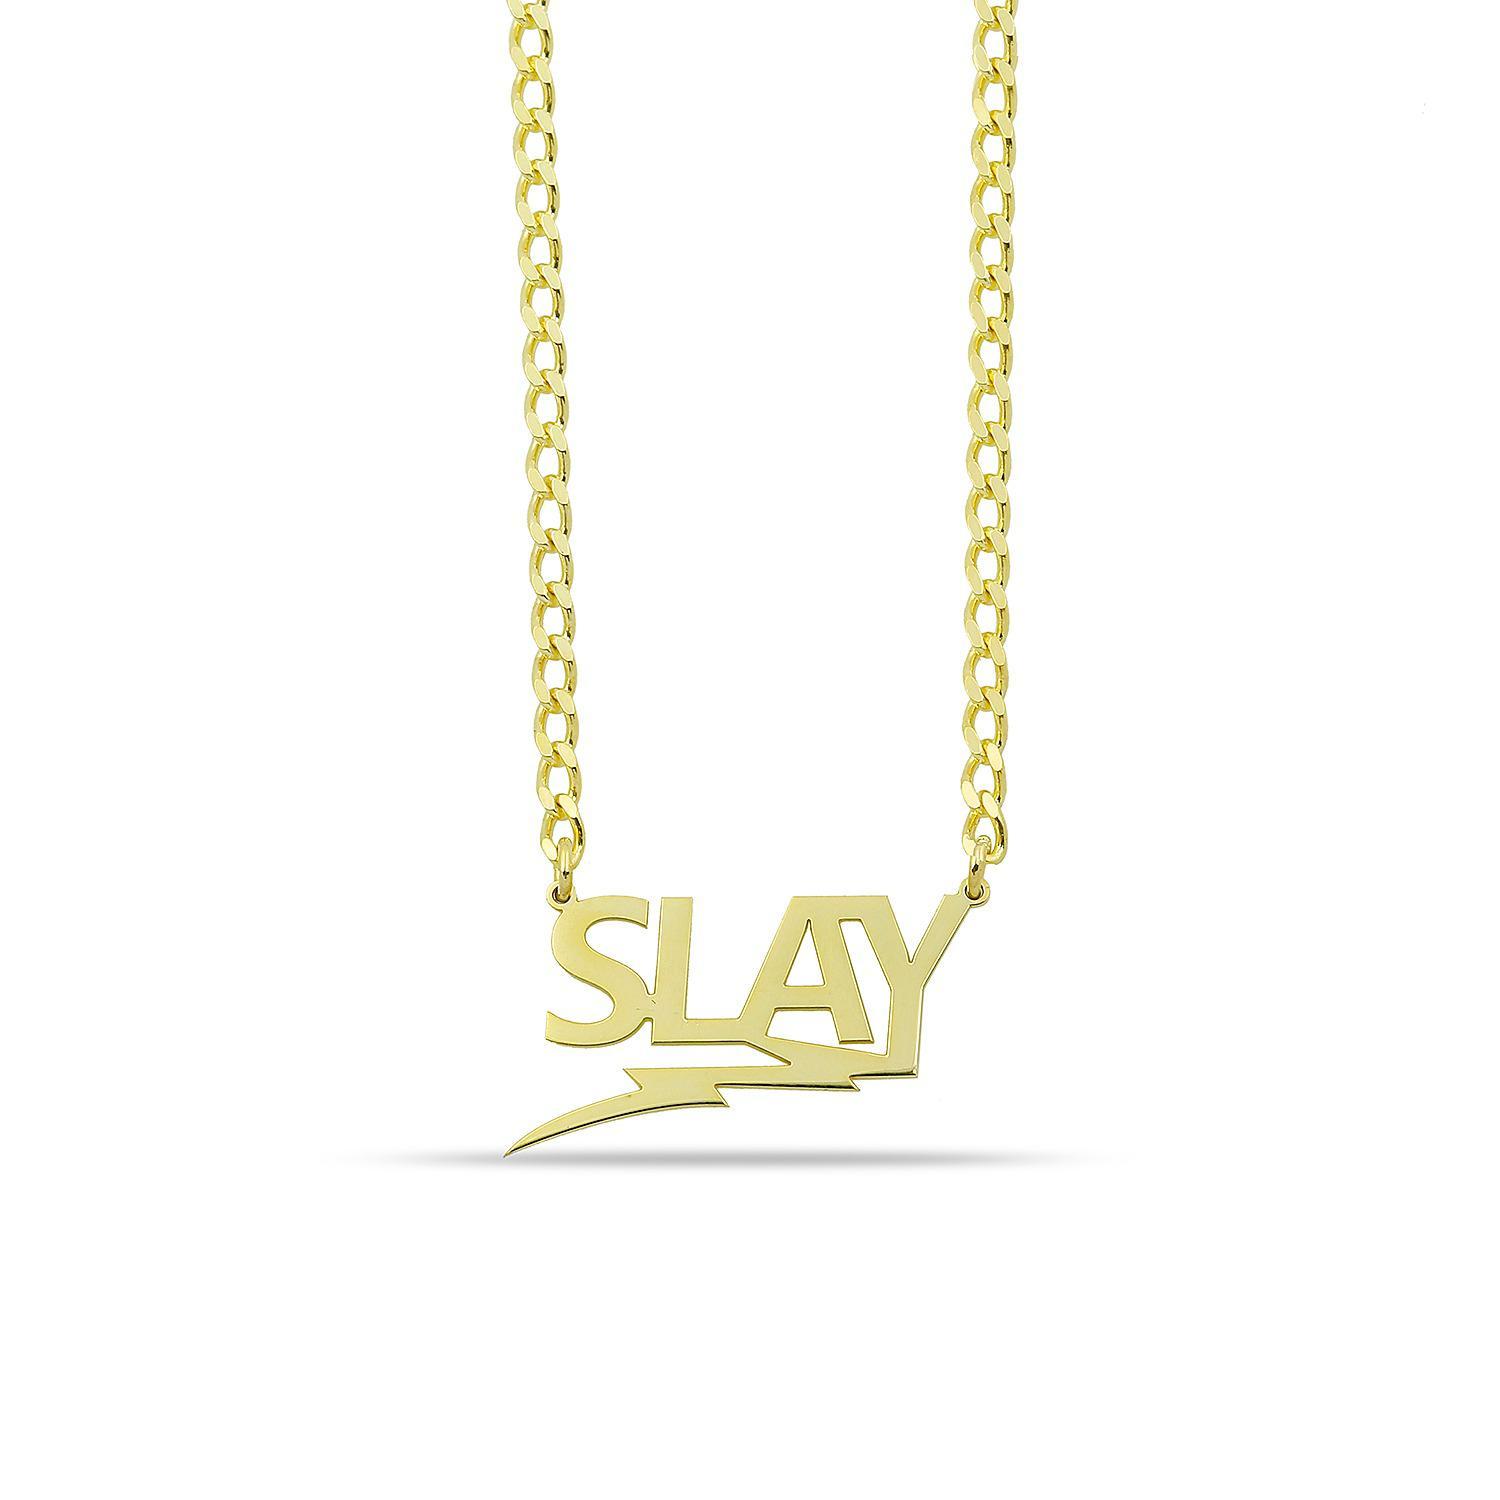 Slay Necklace JEWELRY The Sis Kiss